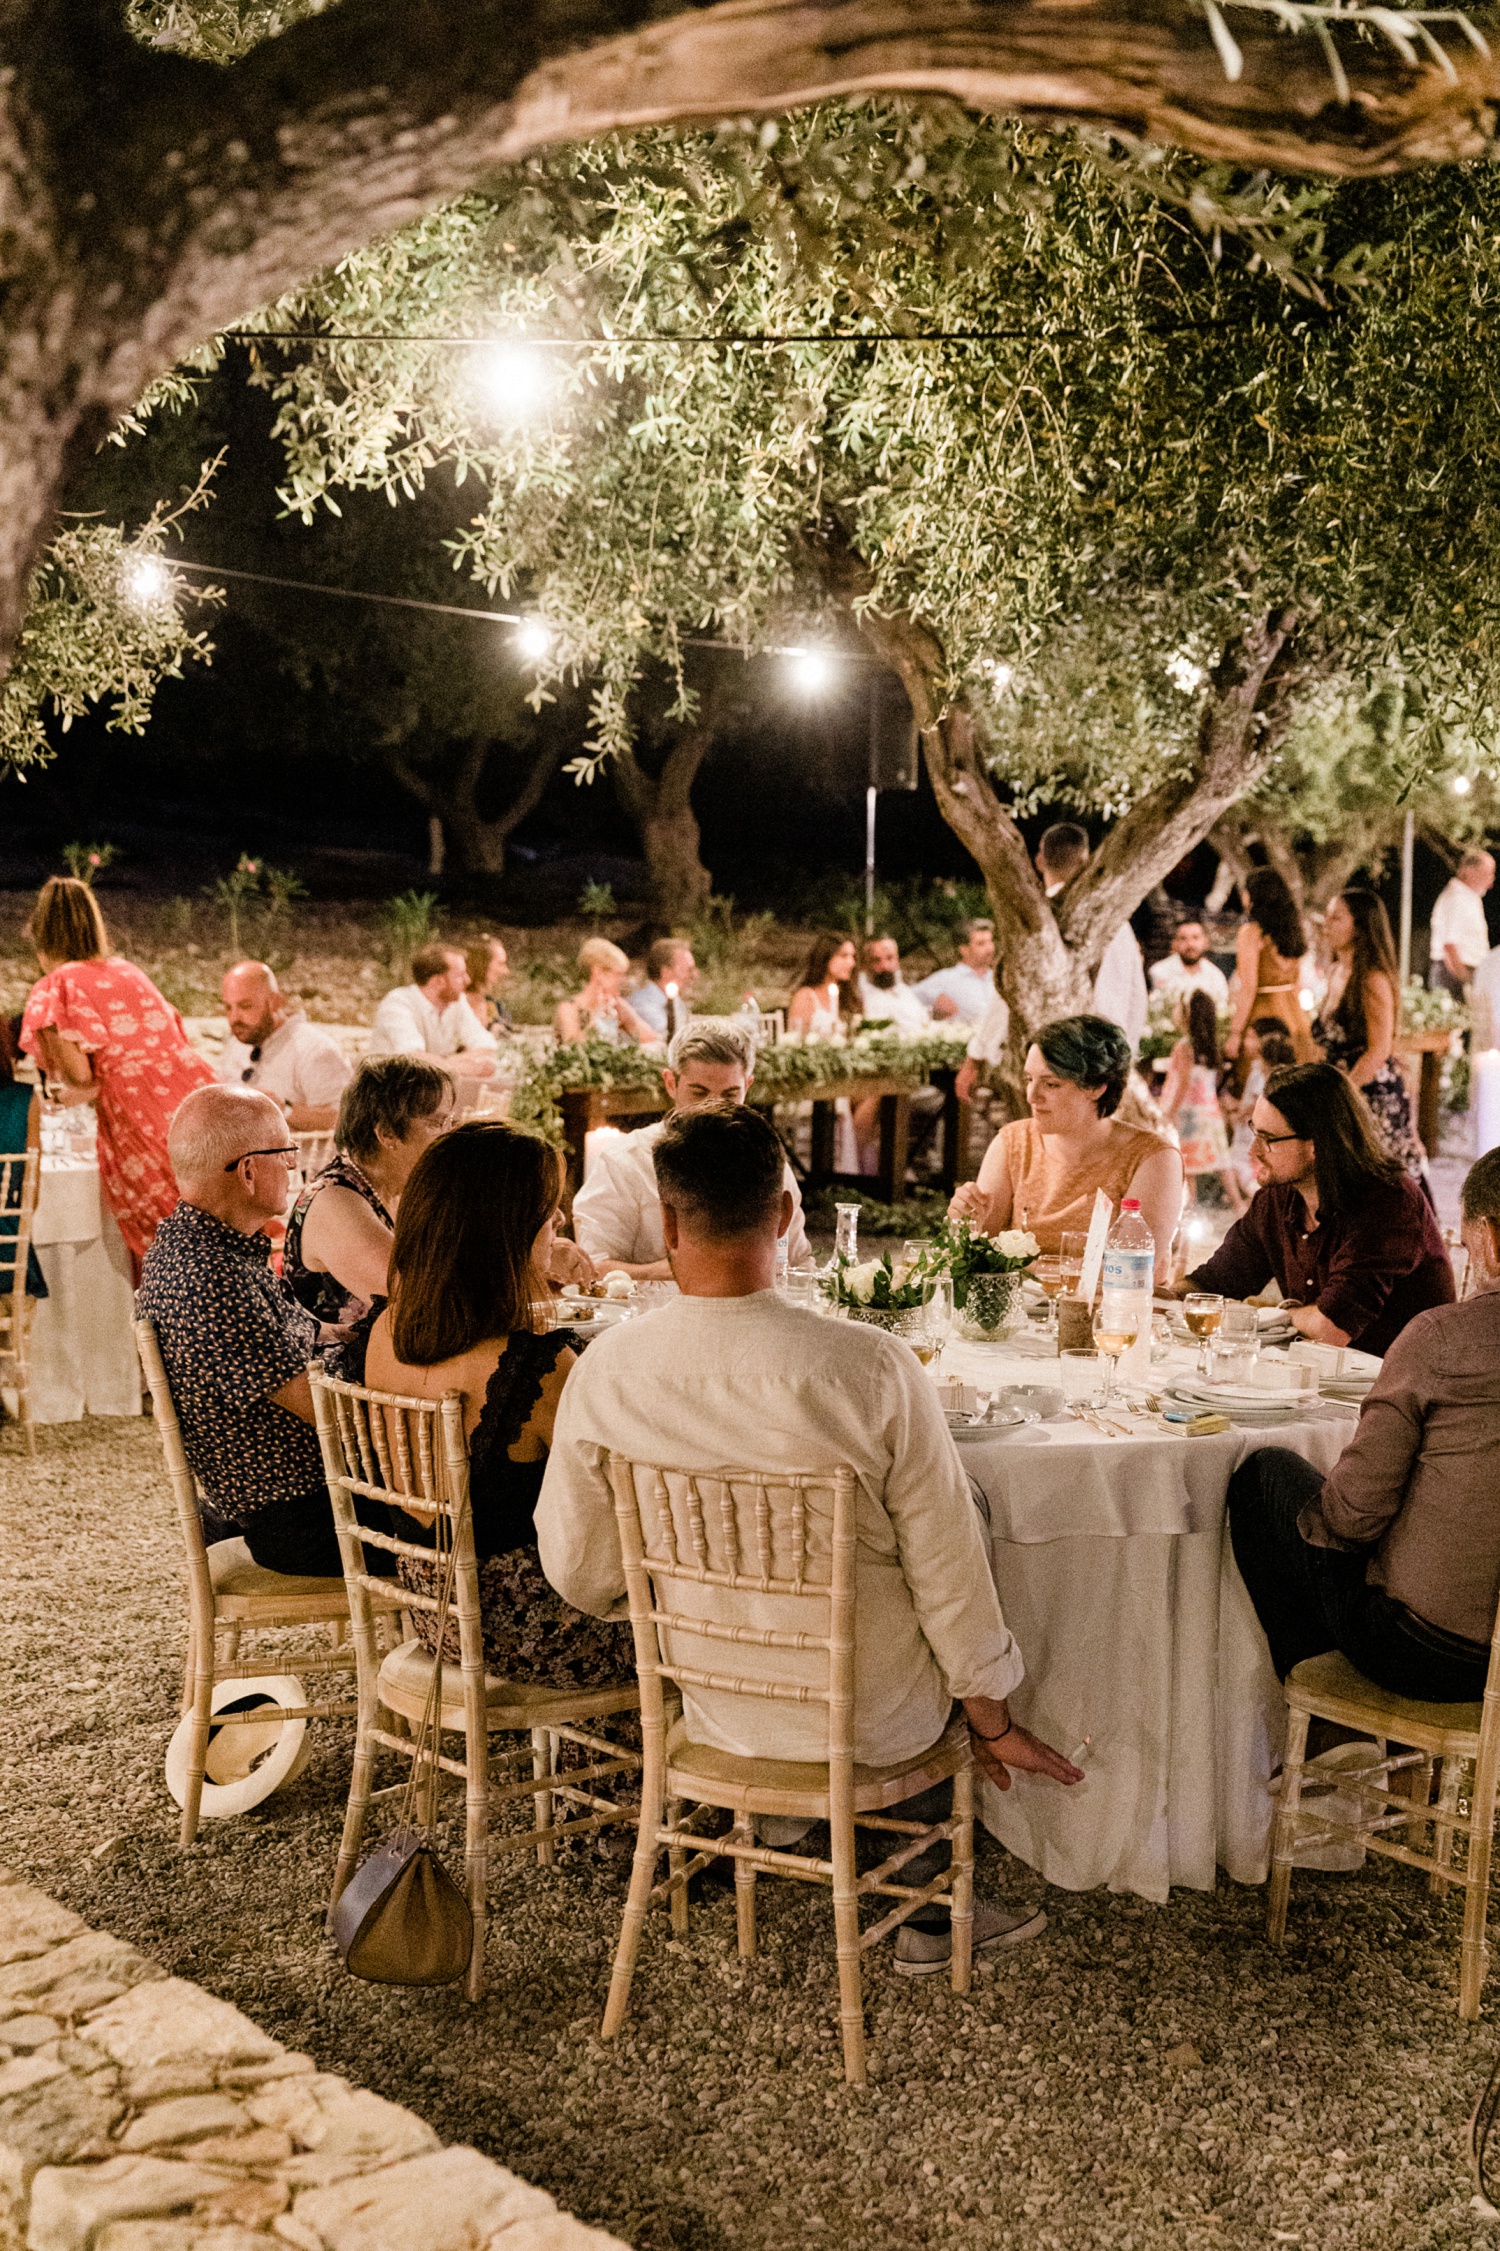 Wedding guests enjoying dinner in an olive grove under strings of fairylights